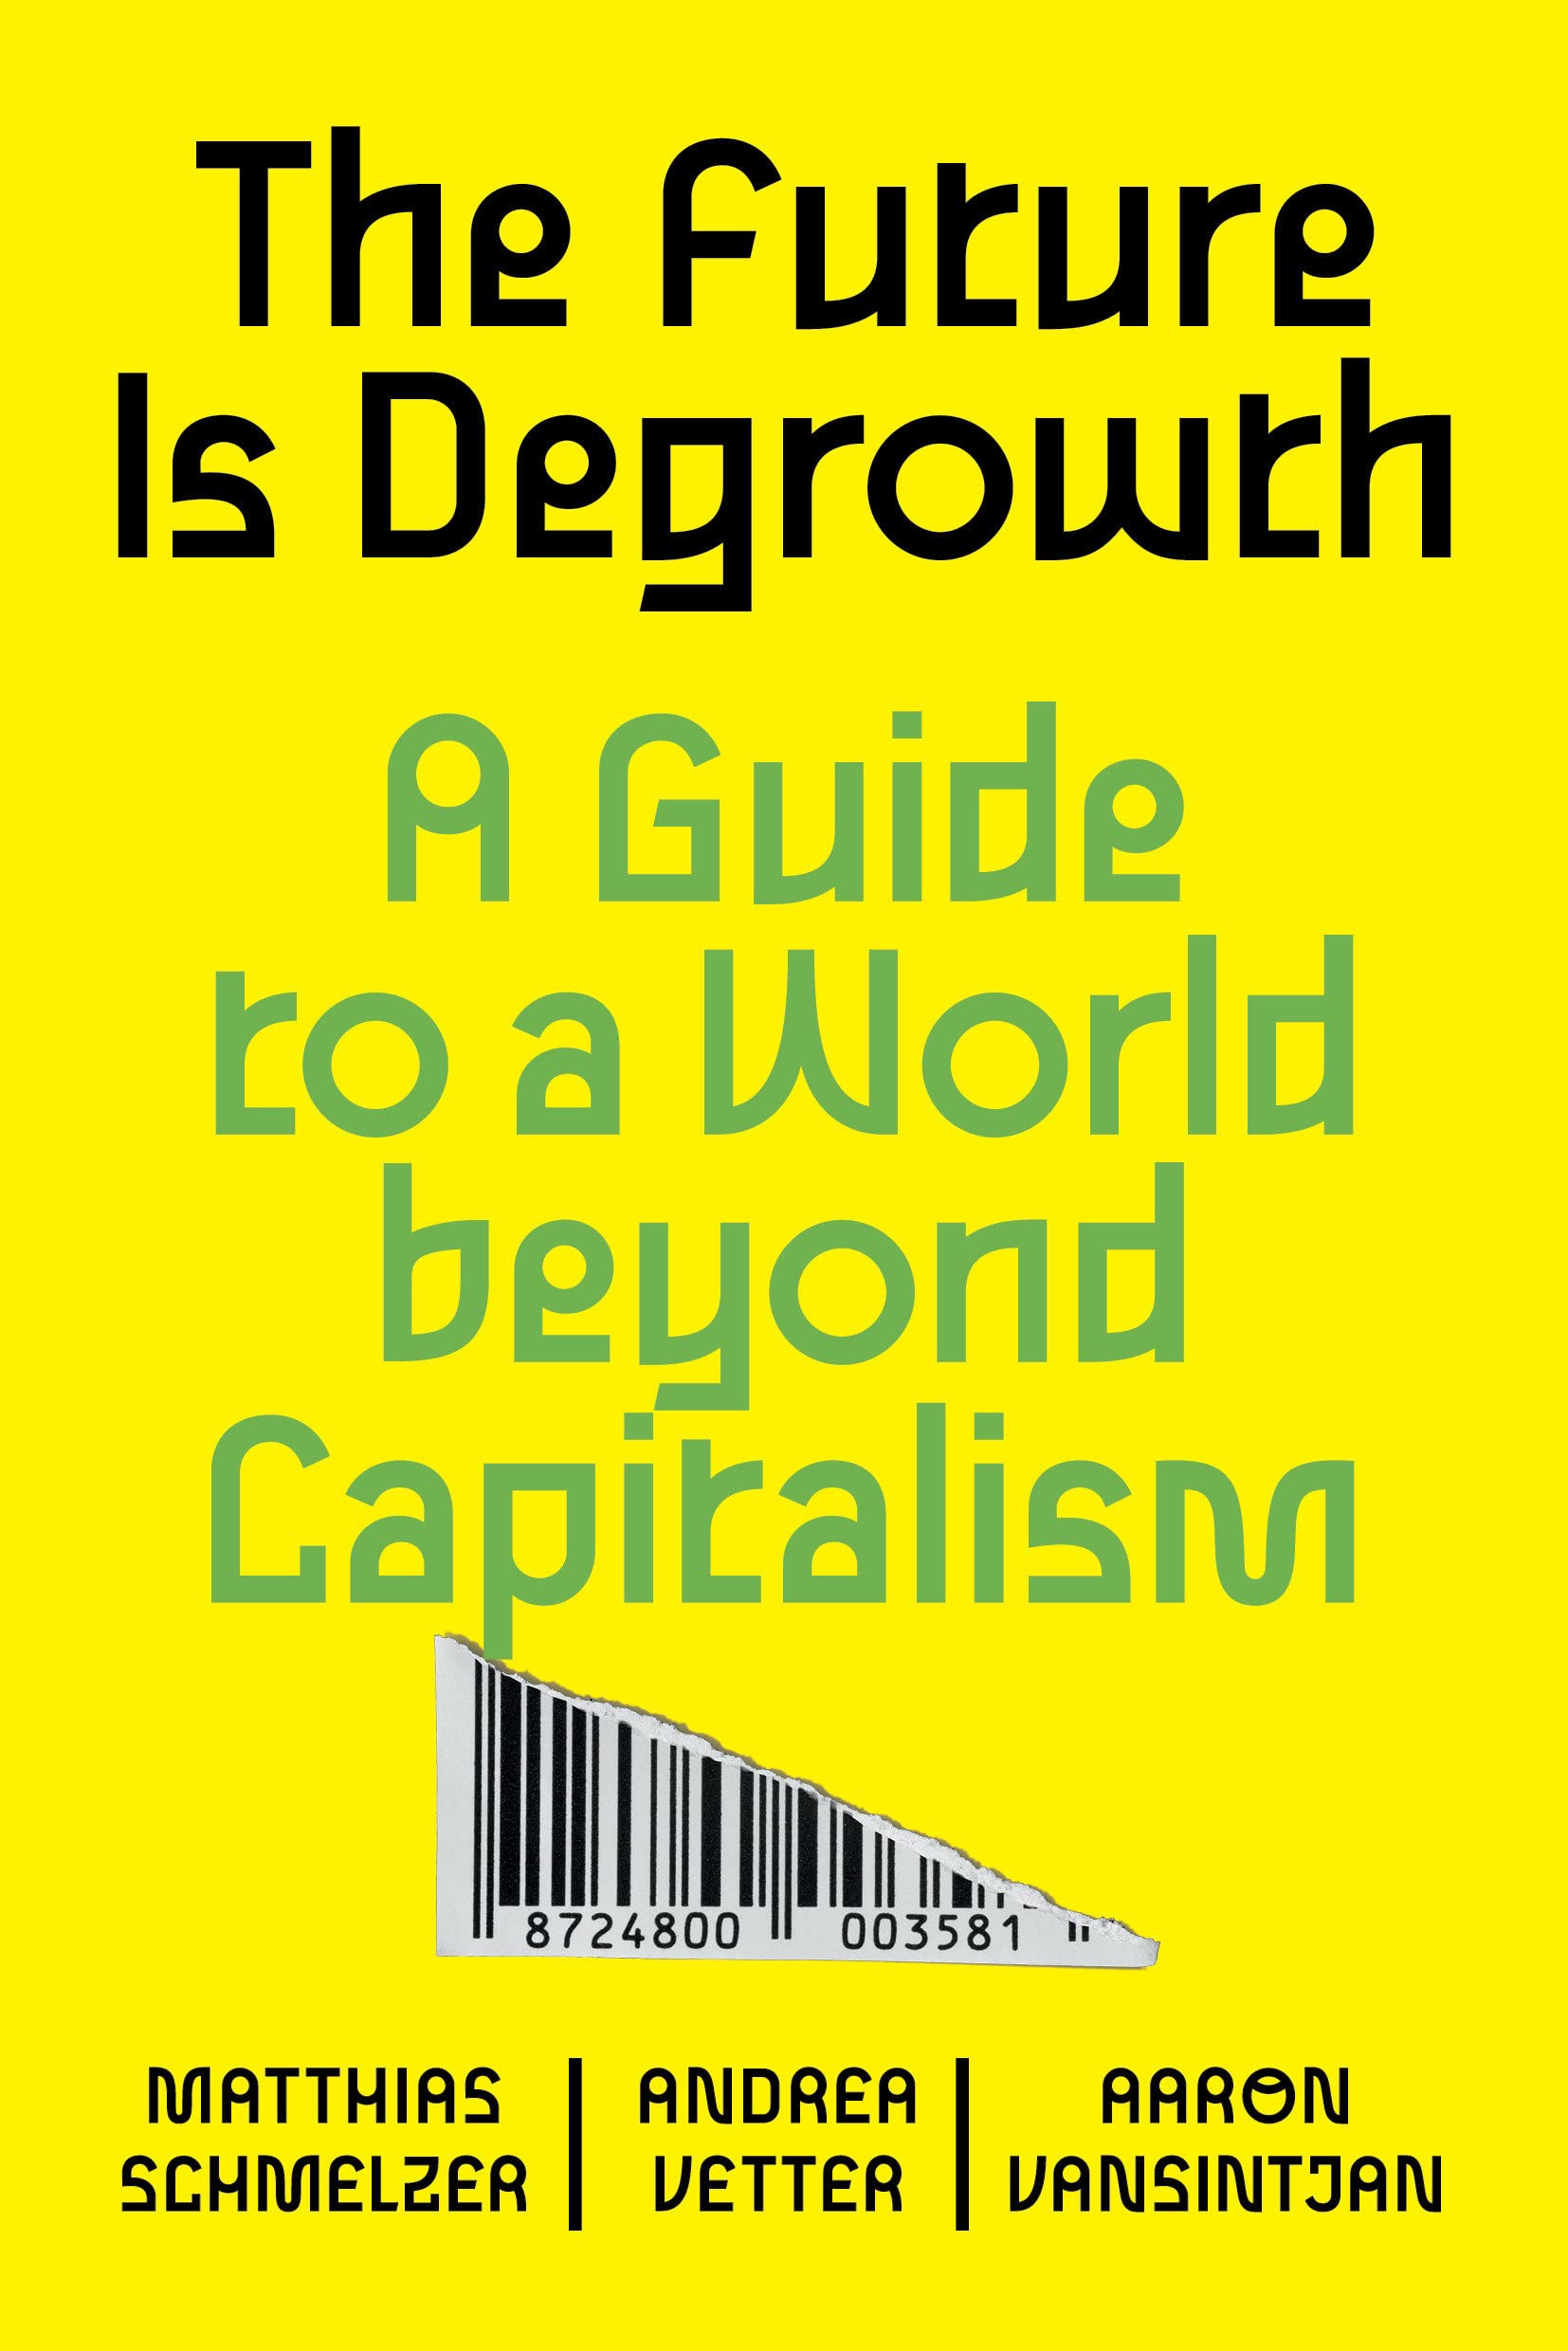 book cover the future is degrowth